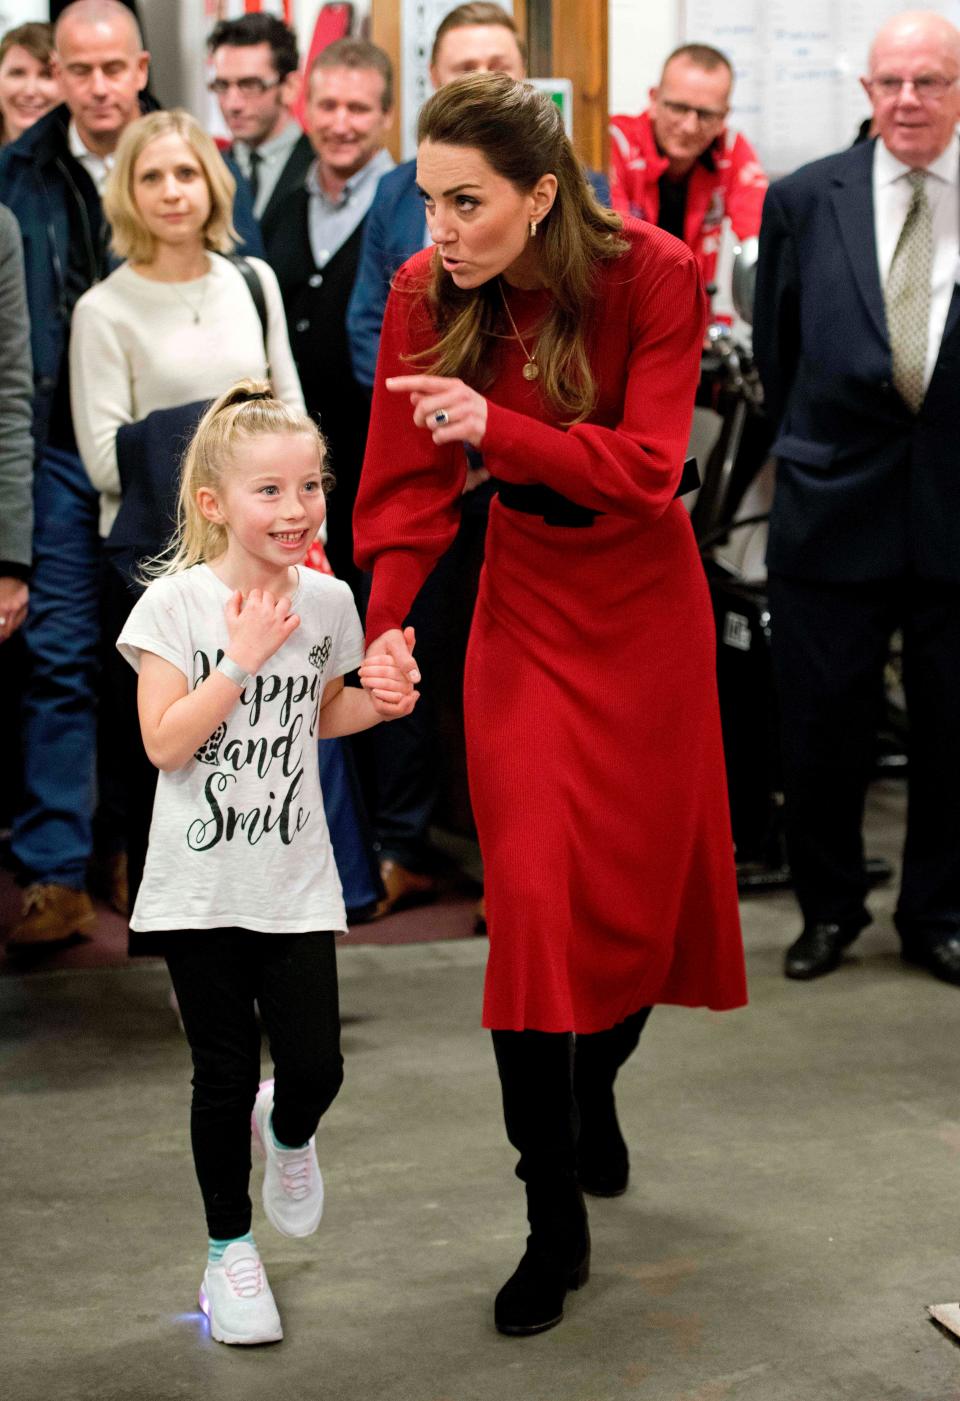 Kate Middleton wears a red Zara dress while holding a child's hand and pointing.